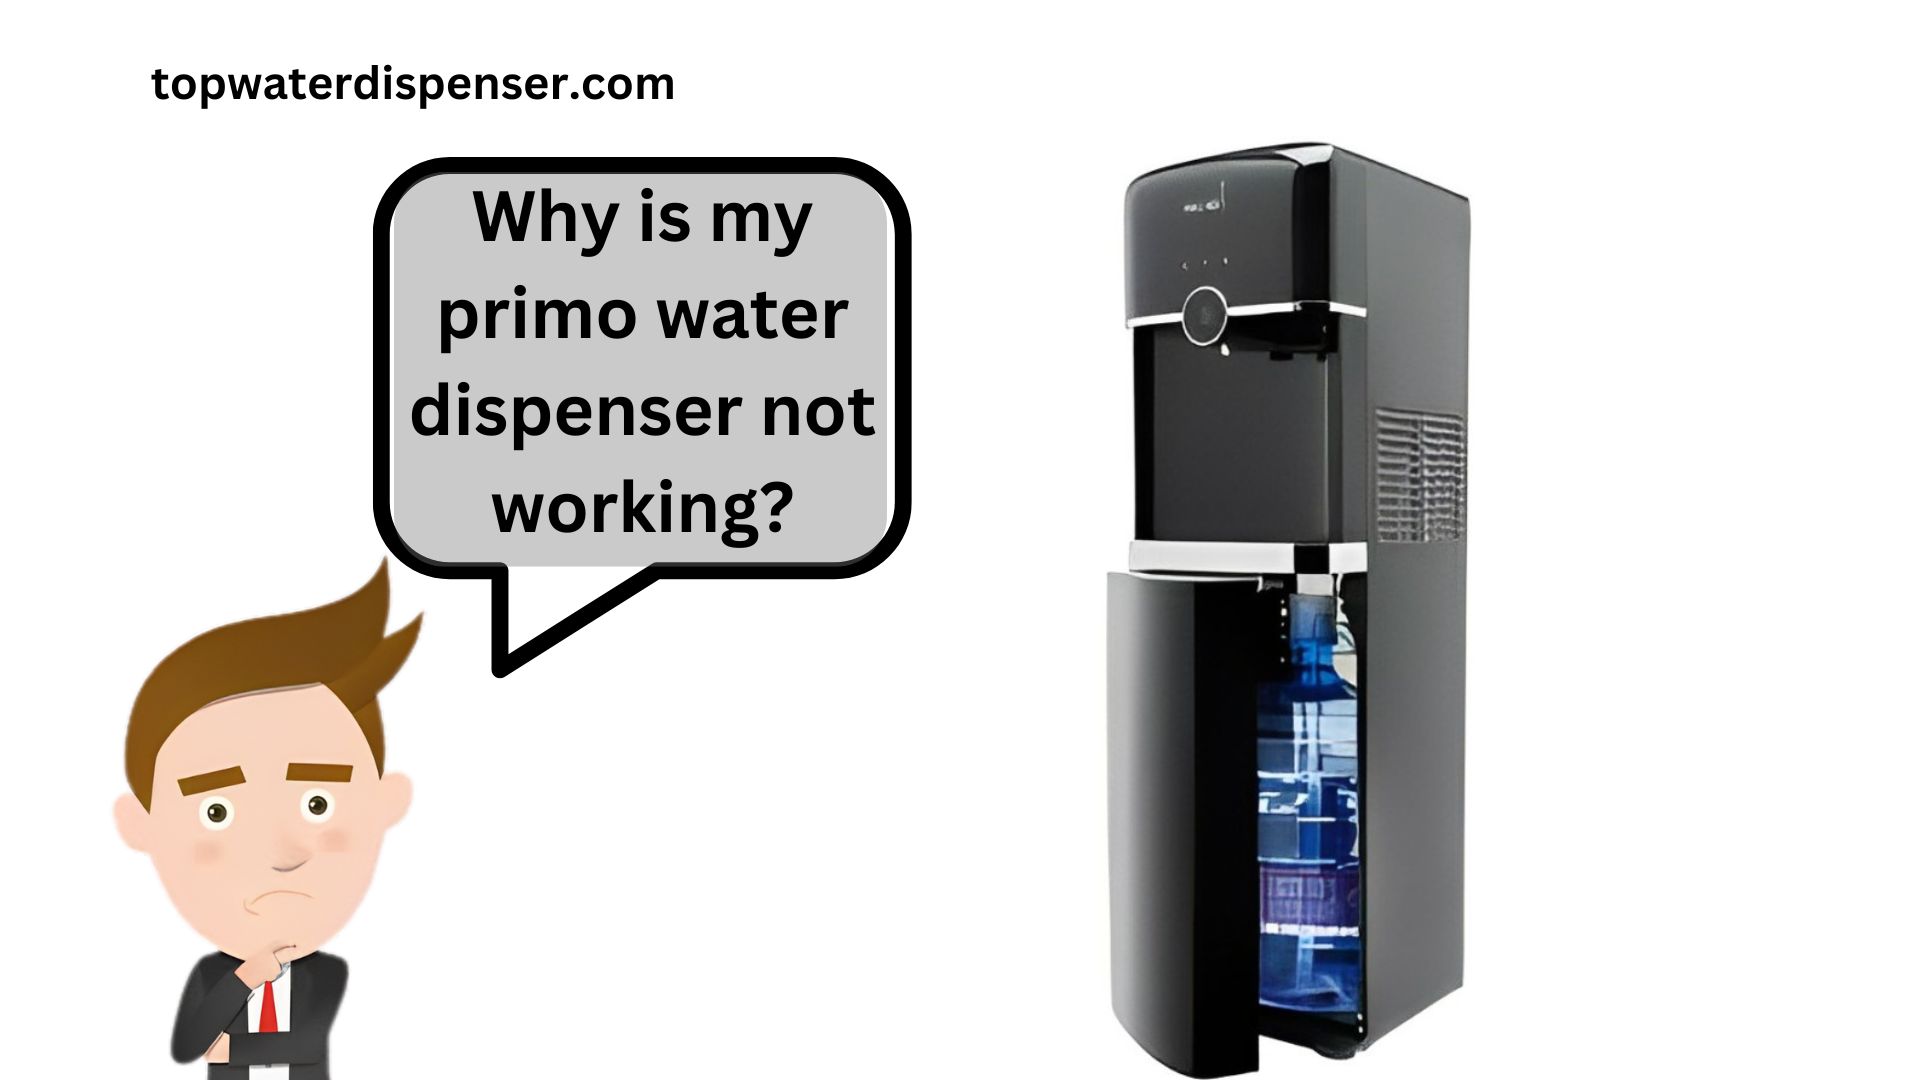 Why is my primo water dispenser not working?